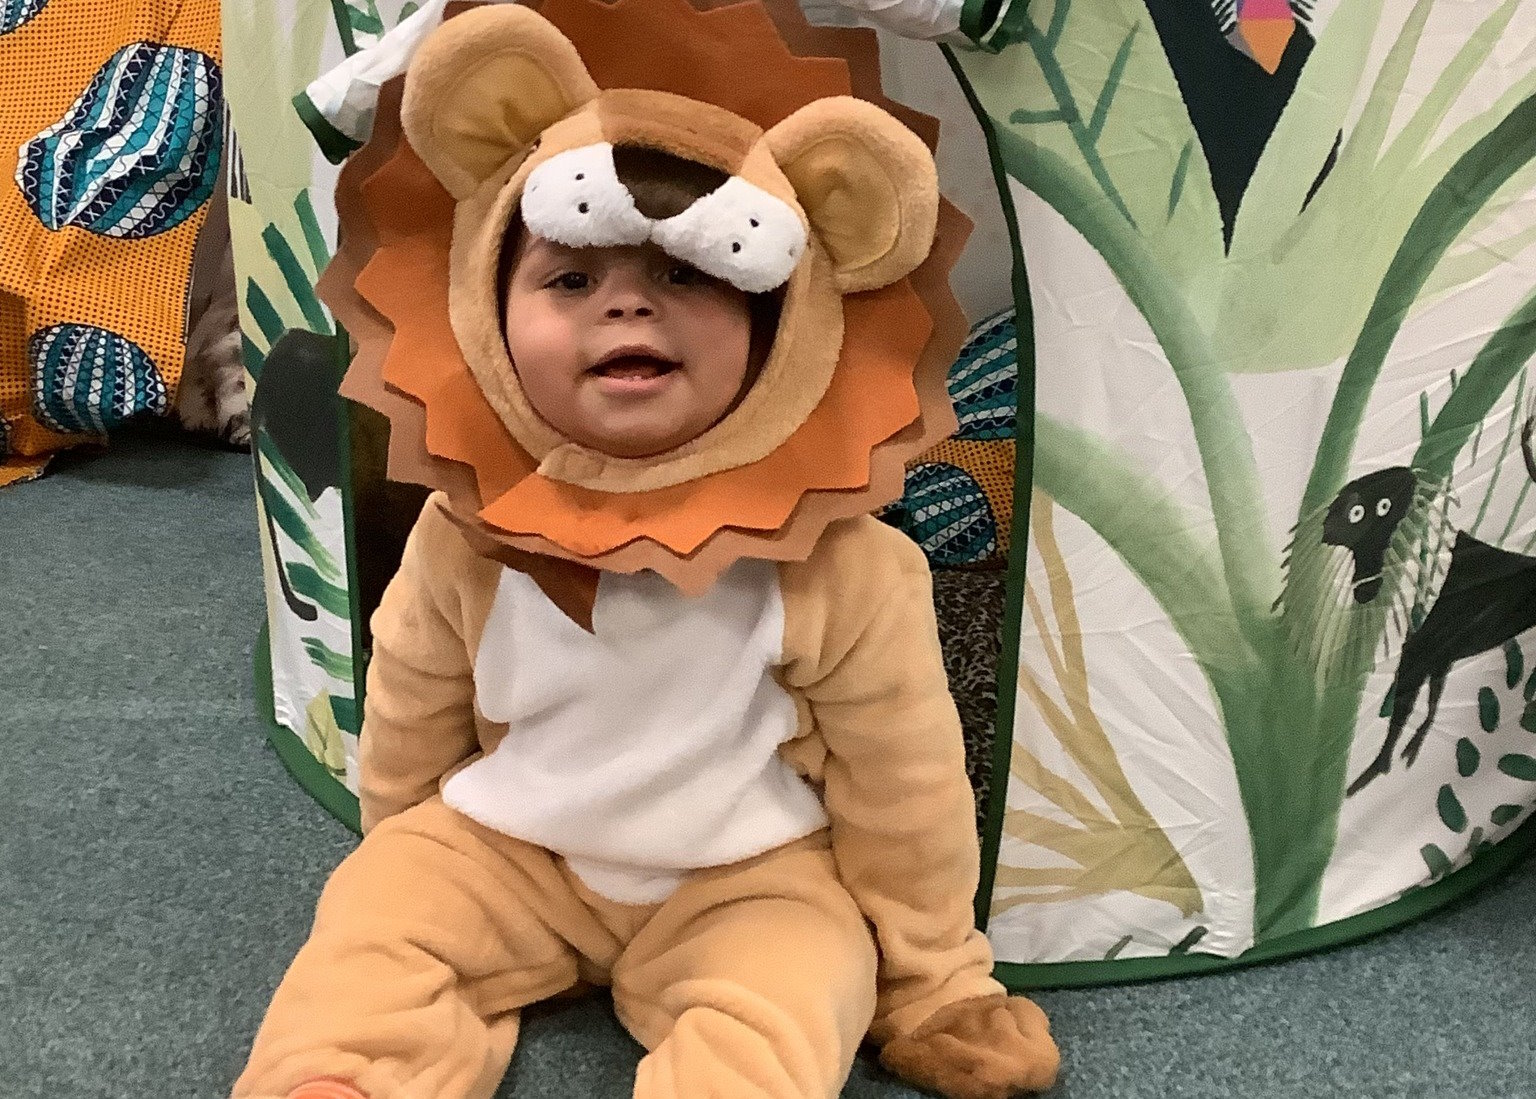 A young boy dressed as a lion